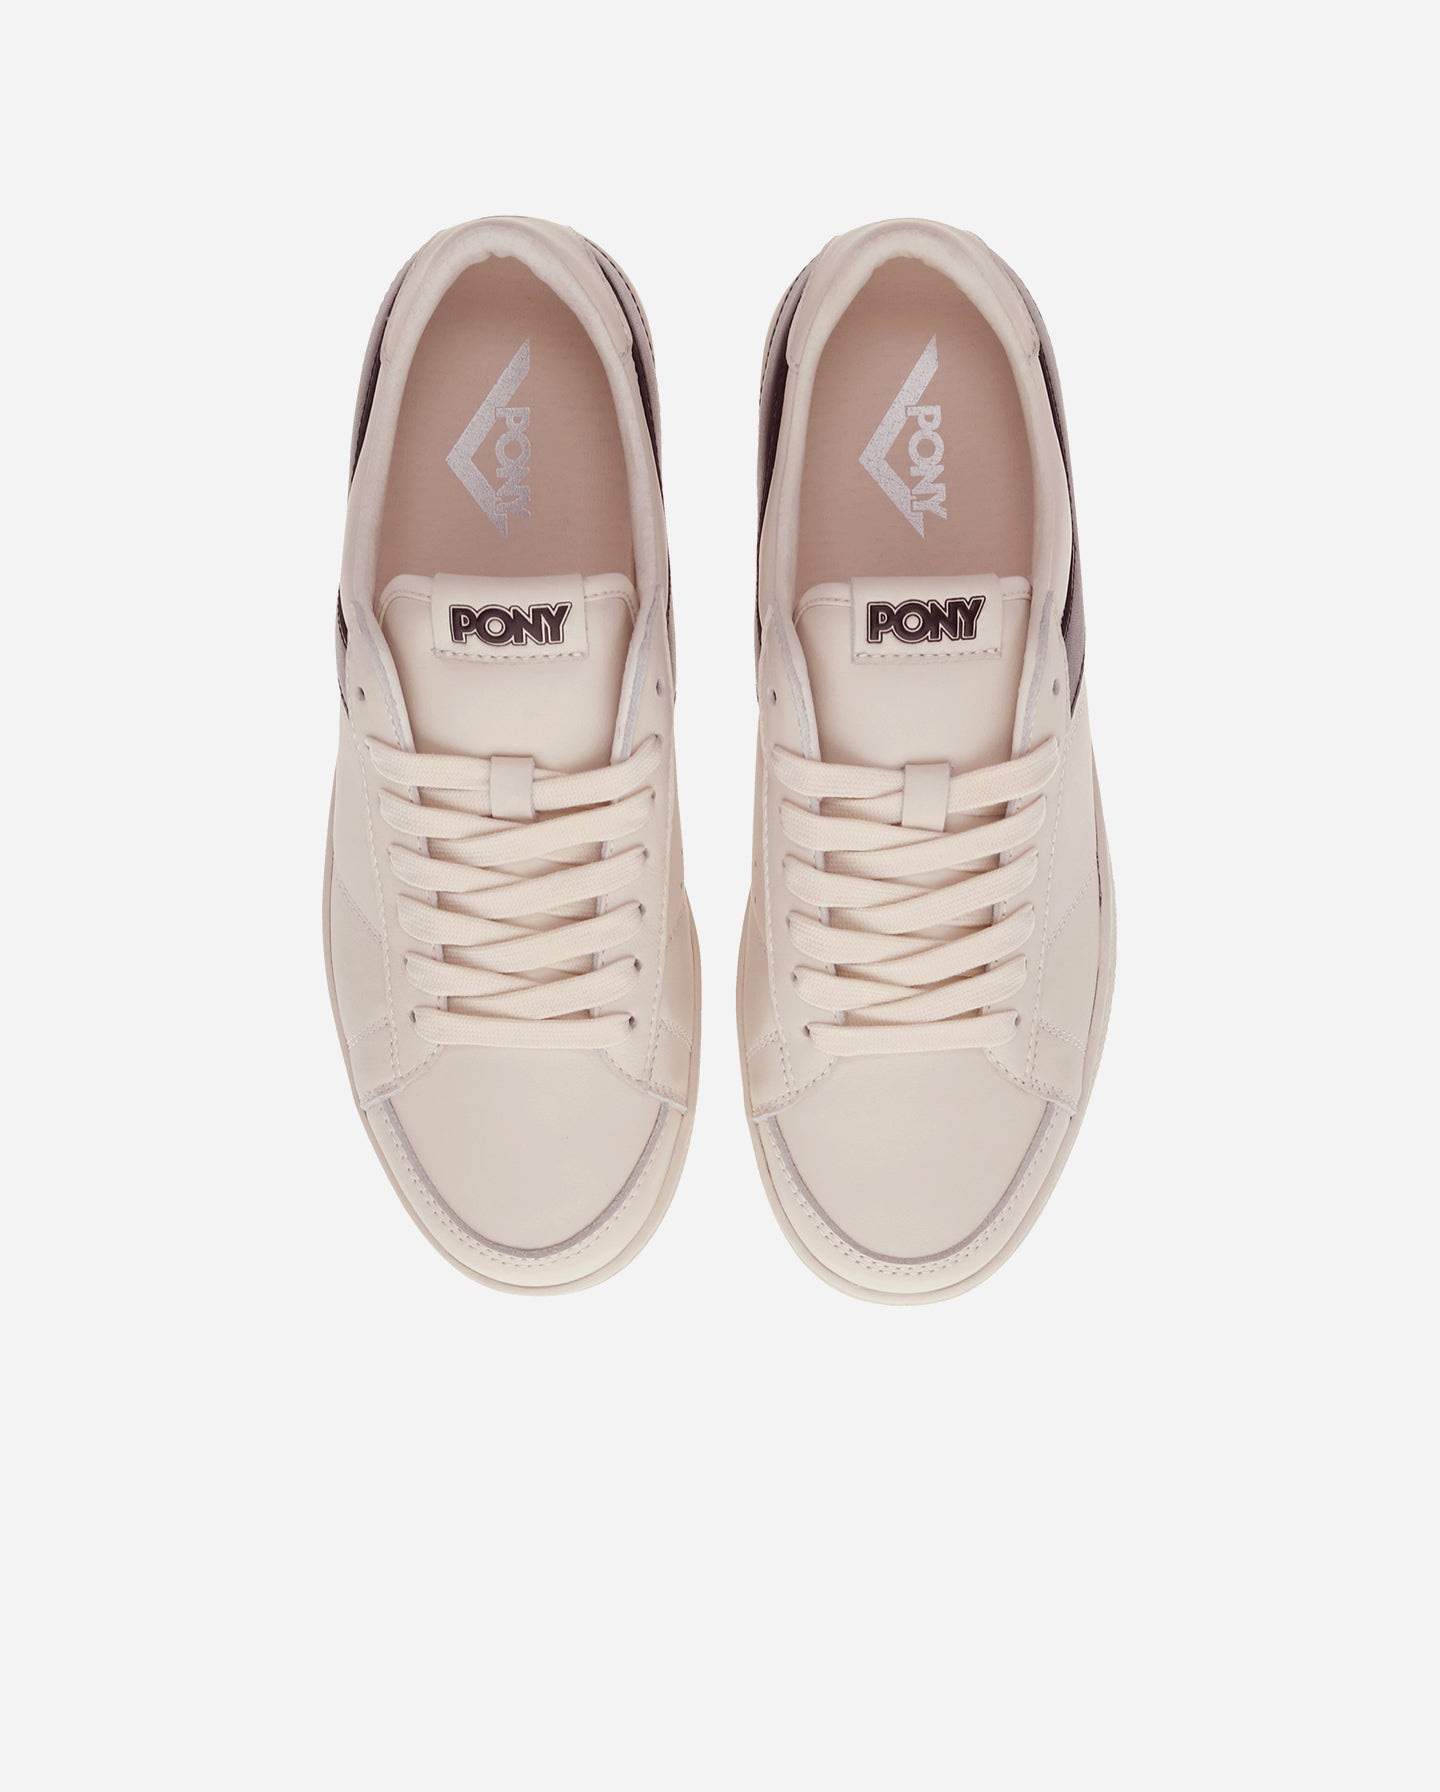 pony apparel and shoes